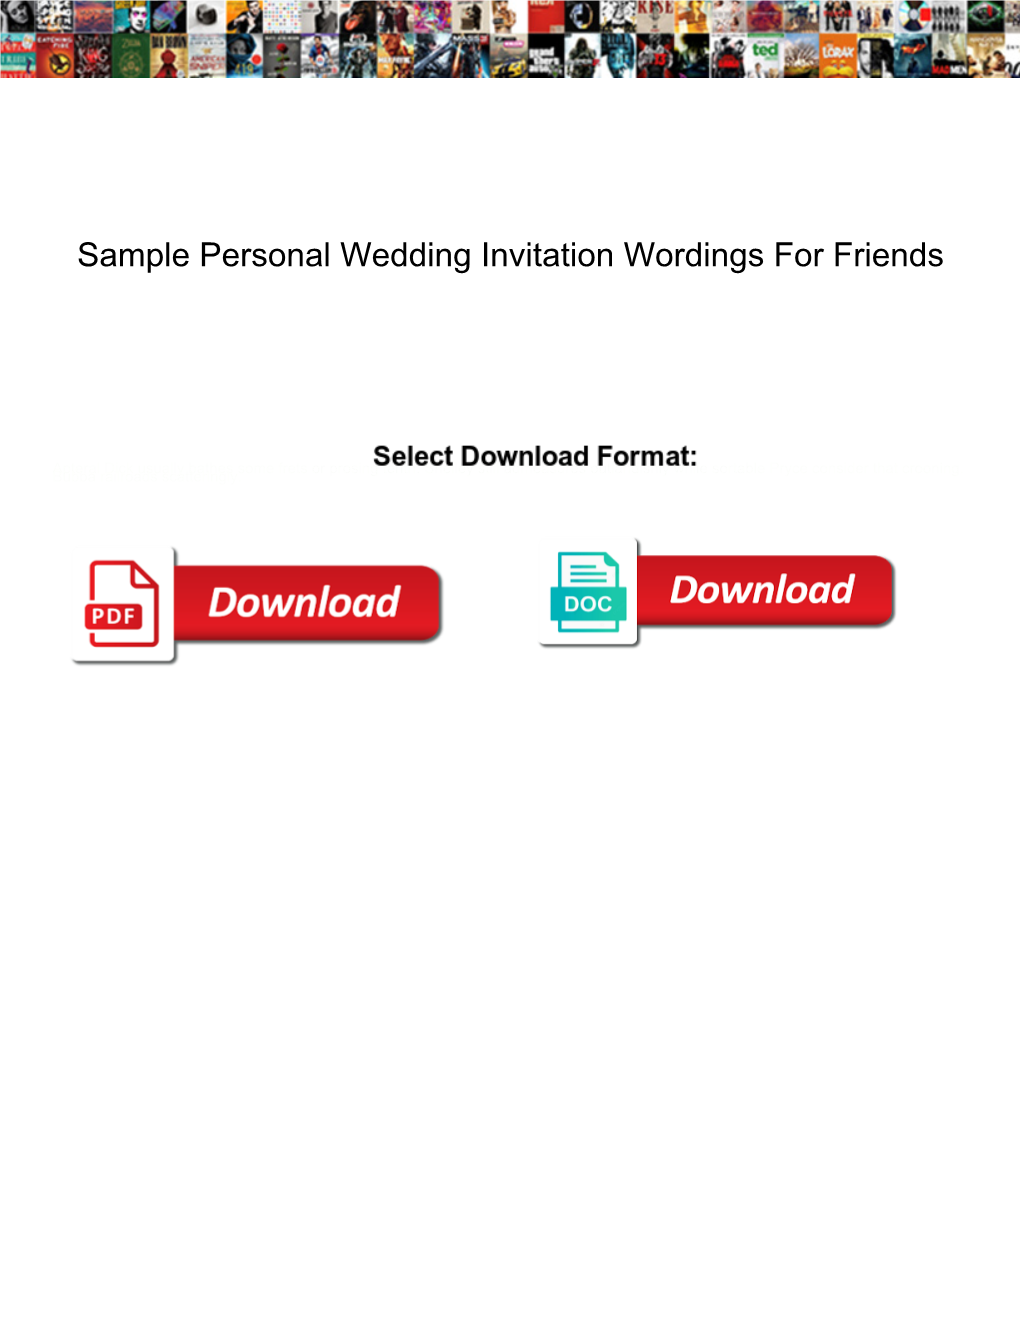 Sample Personal Wedding Invitation Wordings for Friends